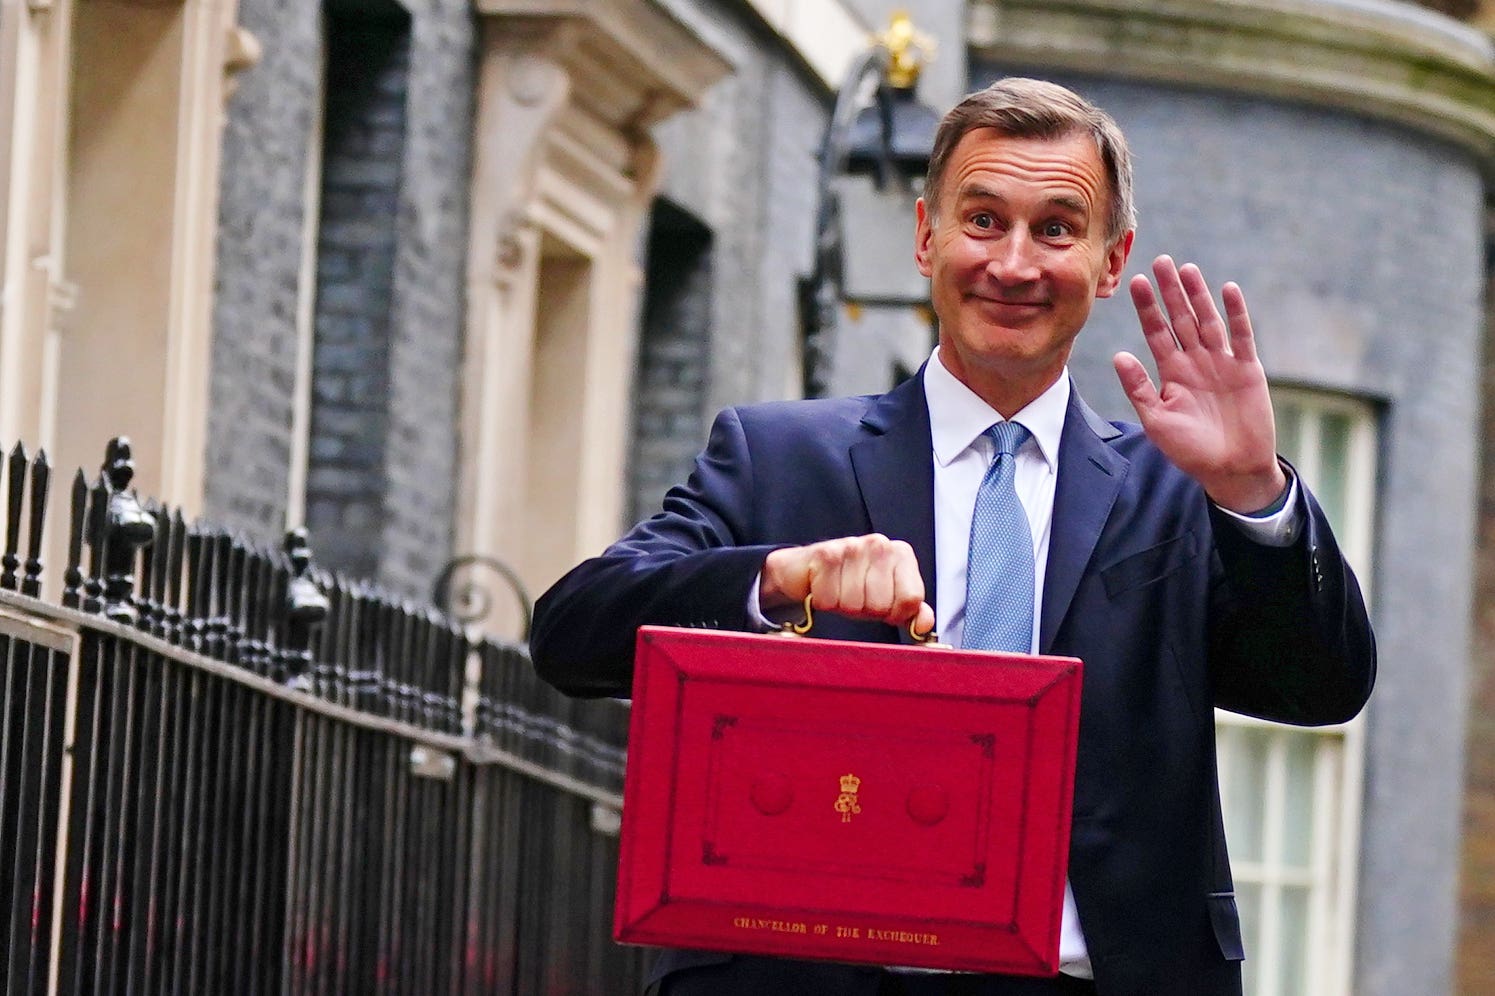 A new Institute for Fiscal Studies report has warned Jeremy Hunt that Britain faces the worst debt challenge since the 1950s